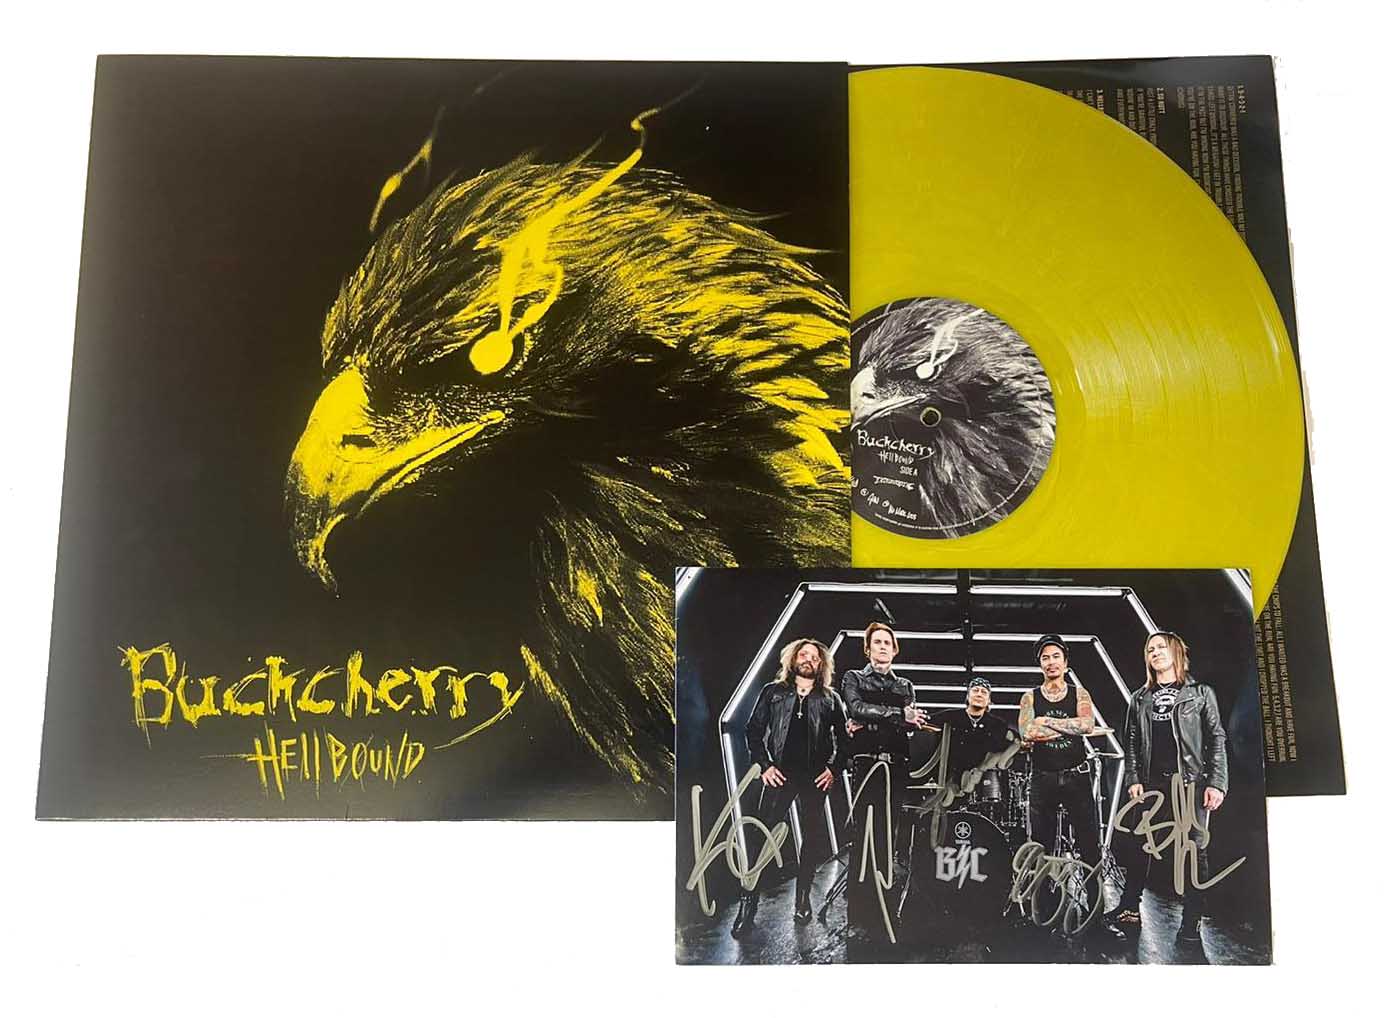 Buckcherry "Hellbound" SIGNED Yellow Vinyl w/ Unique Yellow Cover